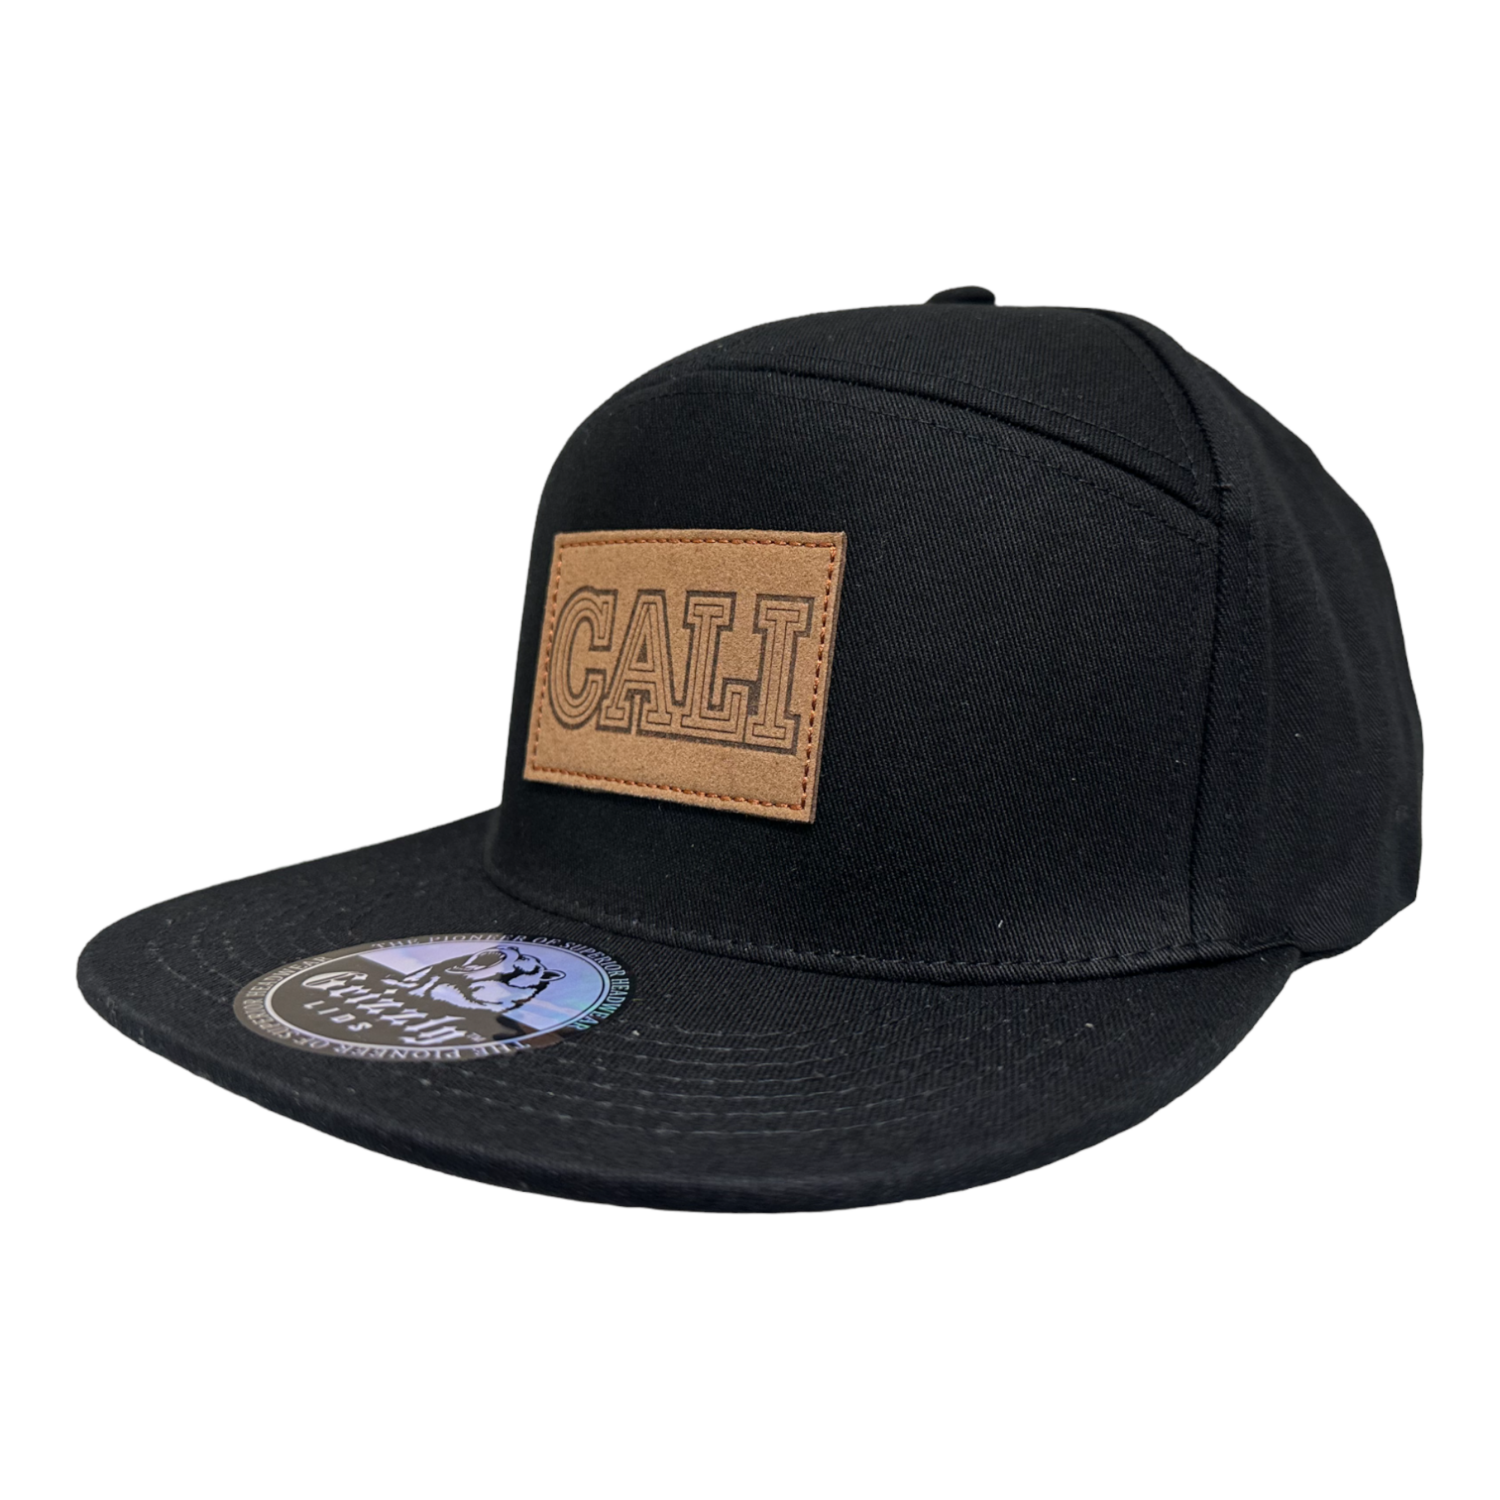 Cali Leather Rectangle Patch Snapback 6 Panel Adjustable Snap Fit Hat